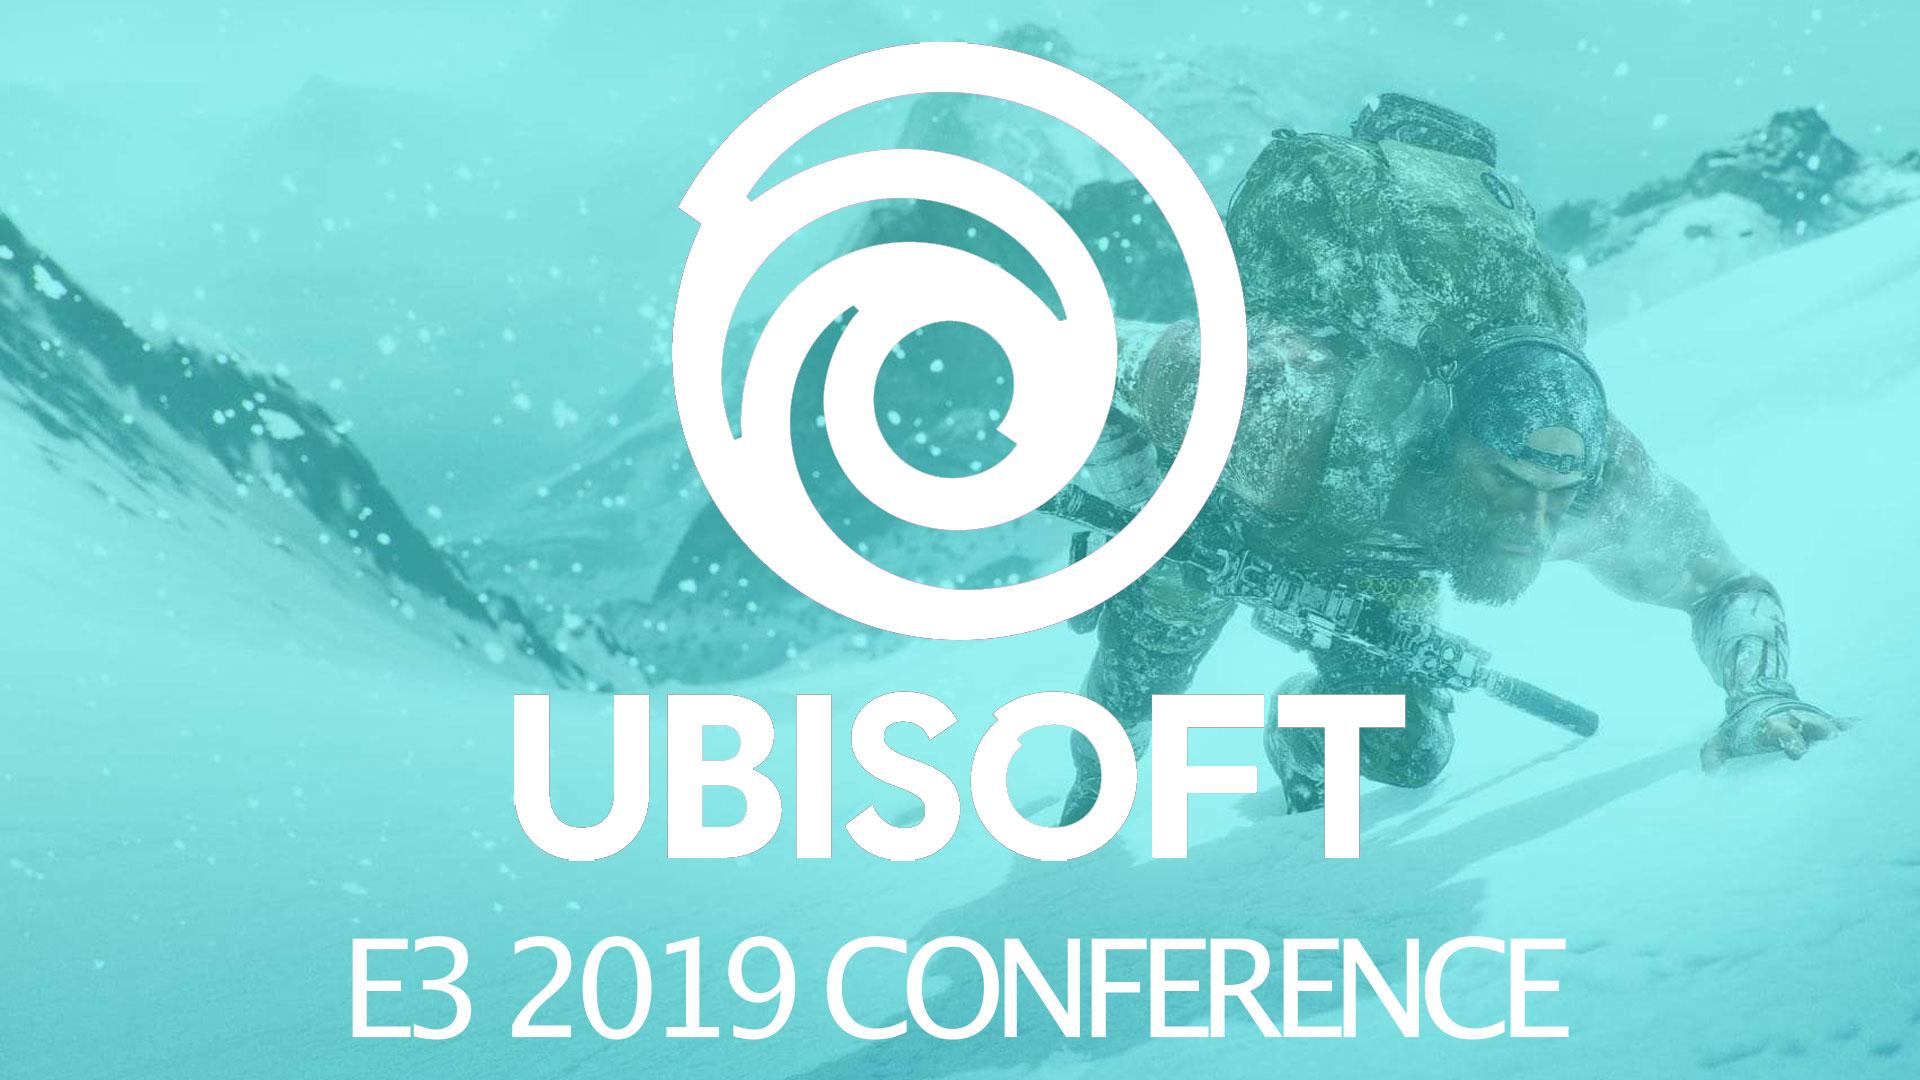 Ubisoft E3 2019: From Assassin's Creed 2020 news to a Watch Dogs